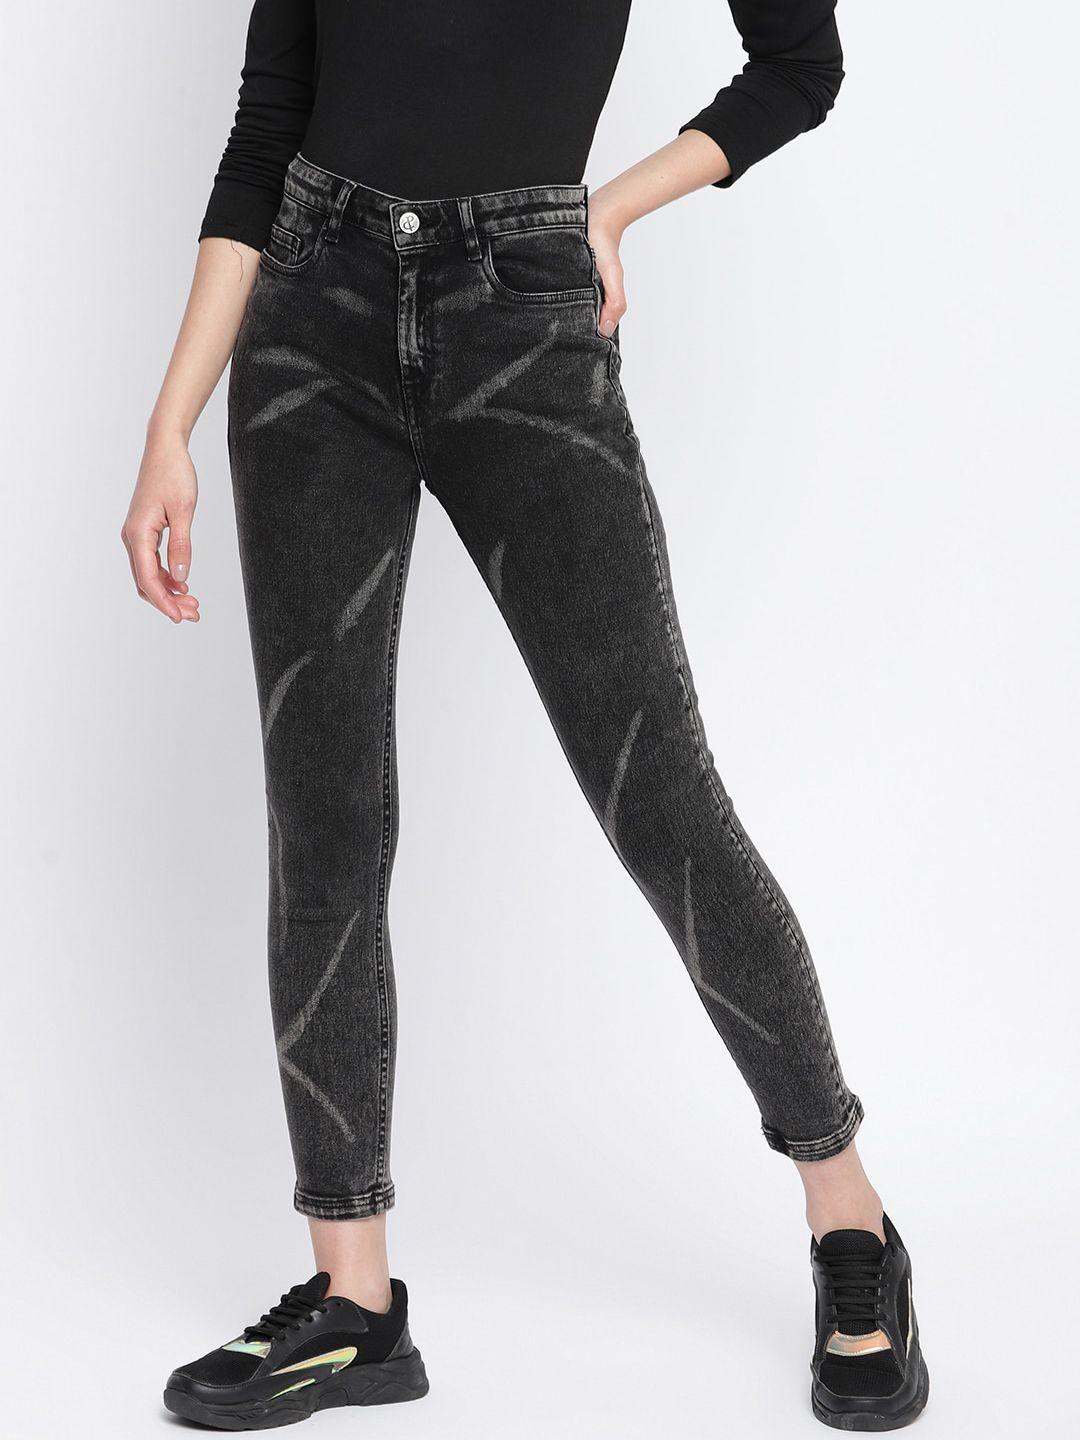 tales & stories women black skinny fit low distress stretchable jeans